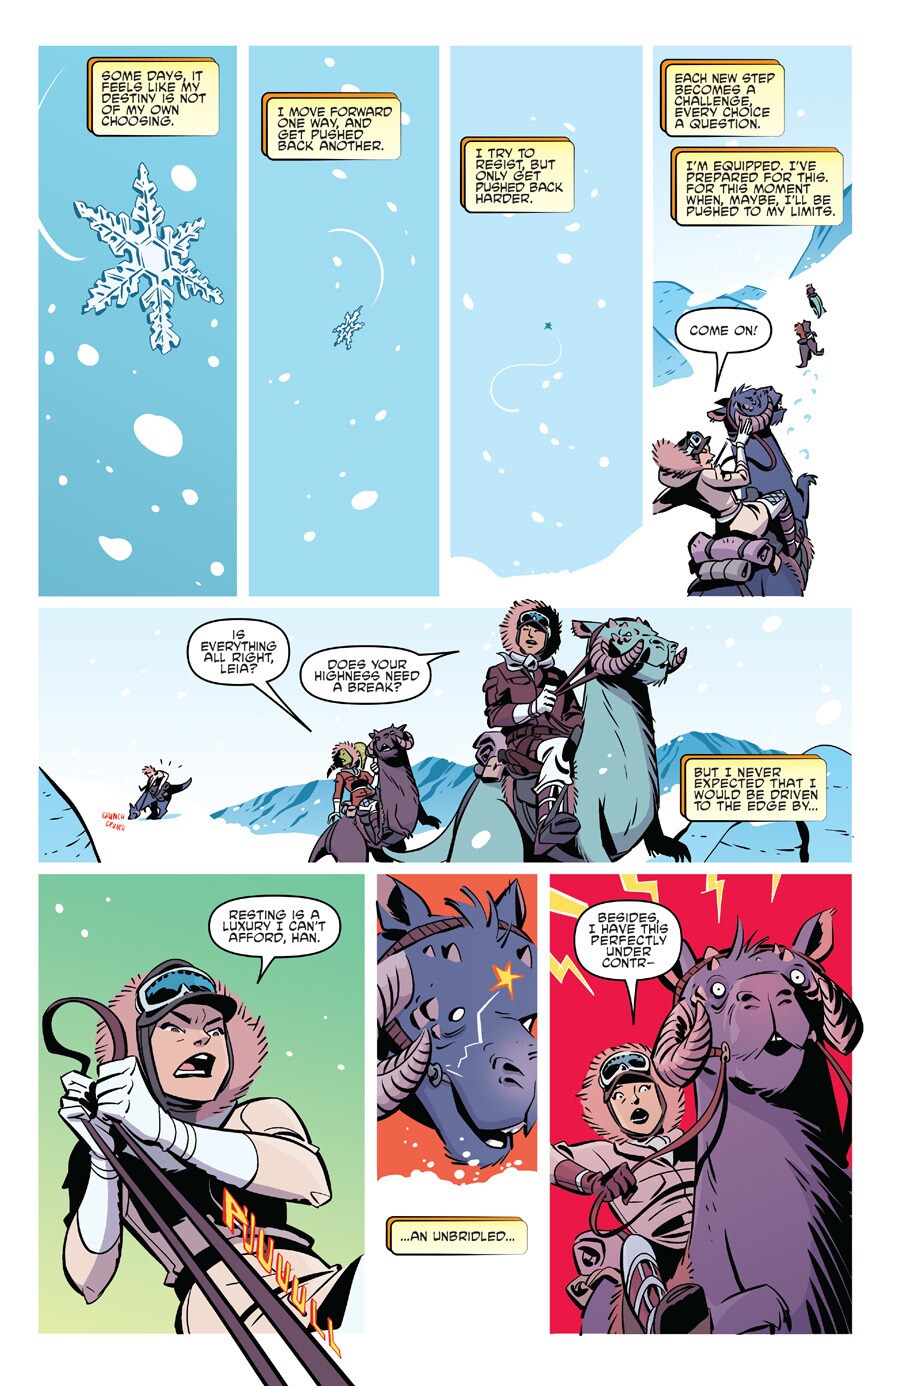 A comic book page depicts Princess Leia riding a tauntaun in the snow.